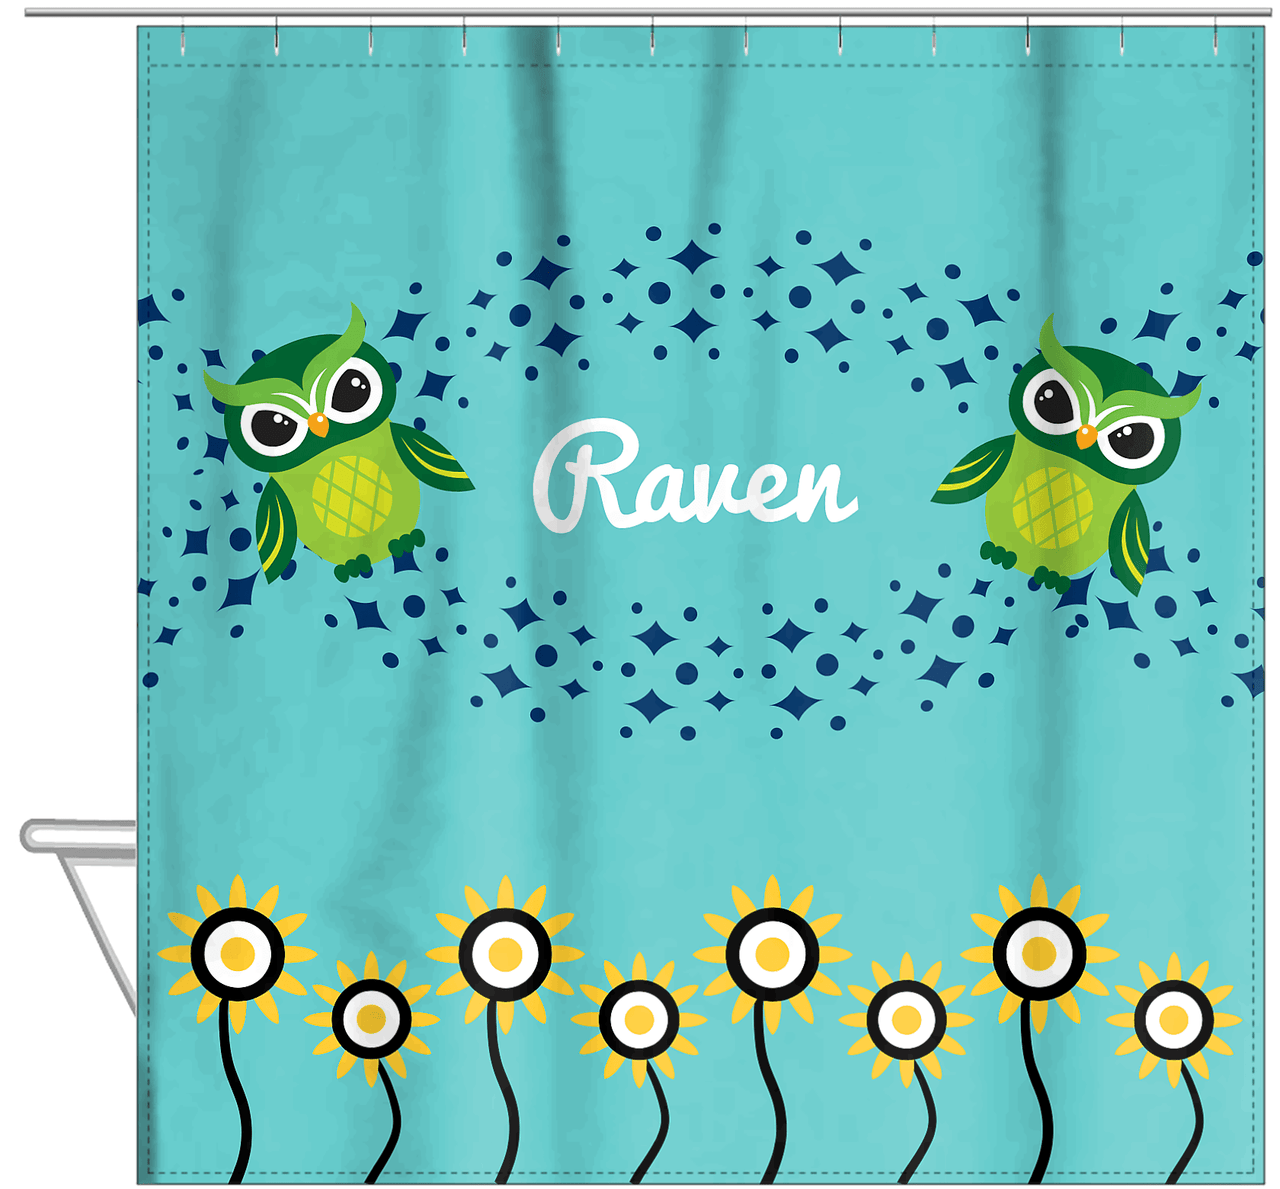 Personalized Owl Shower Curtain V - Owl 03 - Teal Background - Hanging View